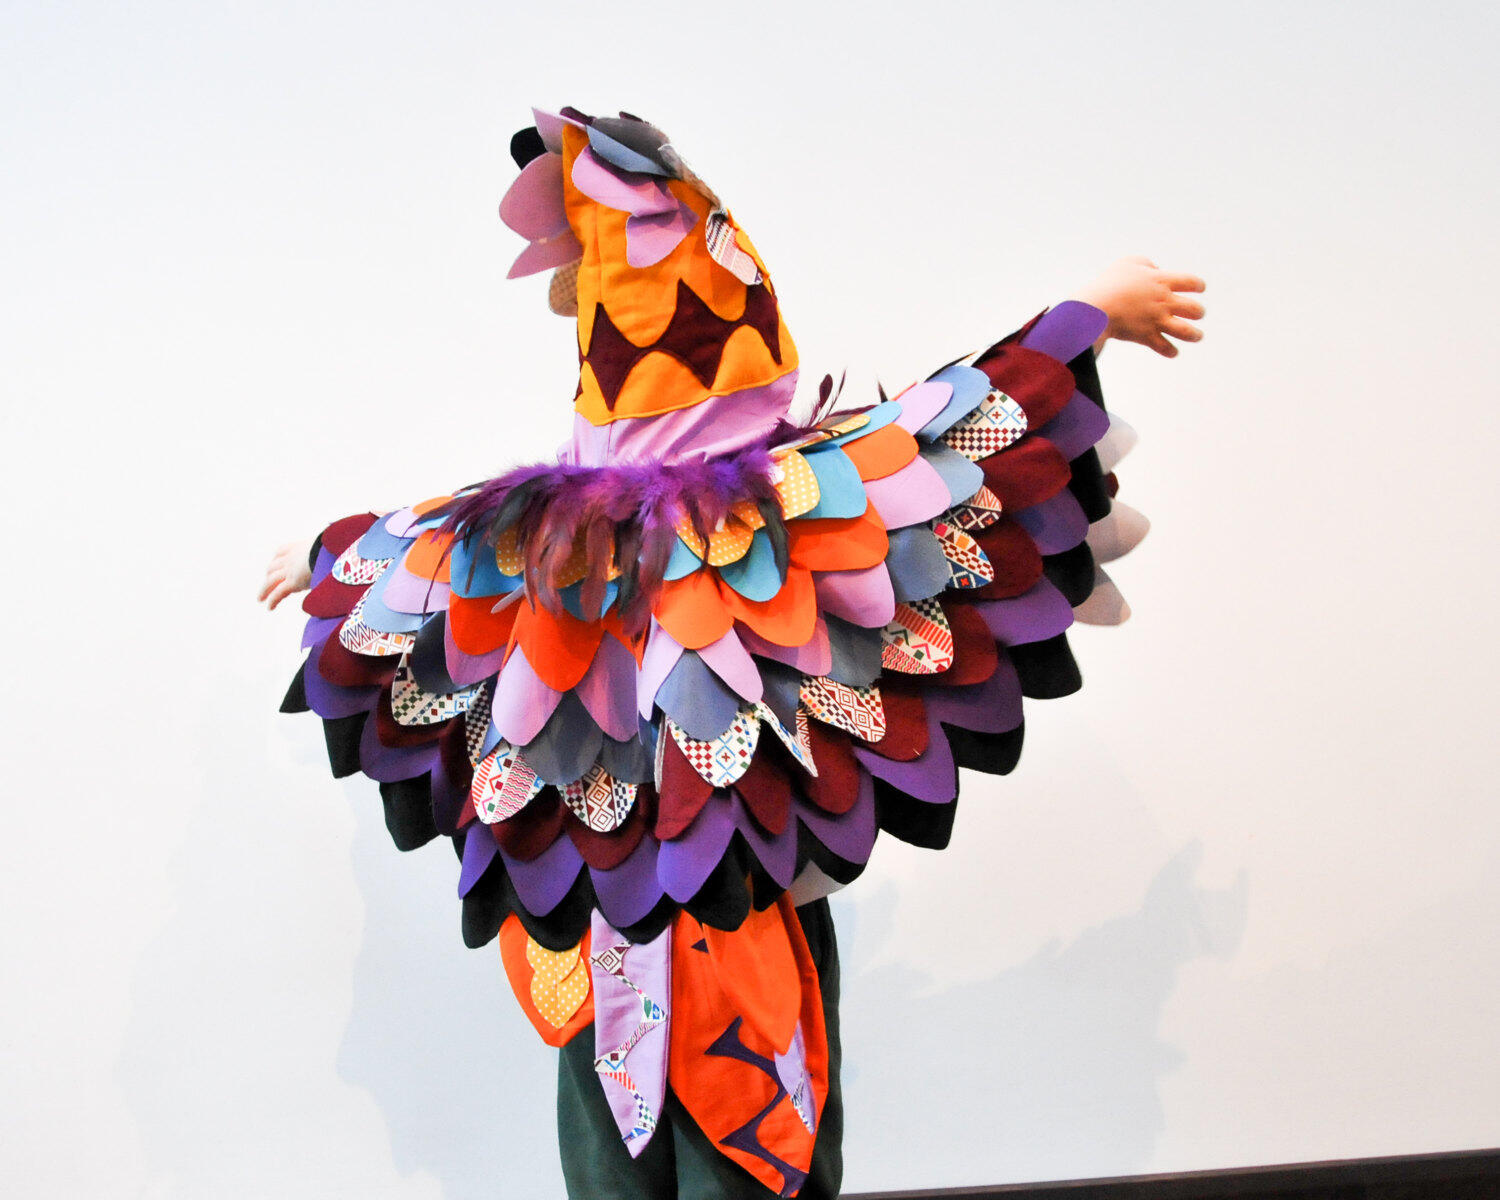 Colorful bird costume for kids at carnival or masquerade costume party